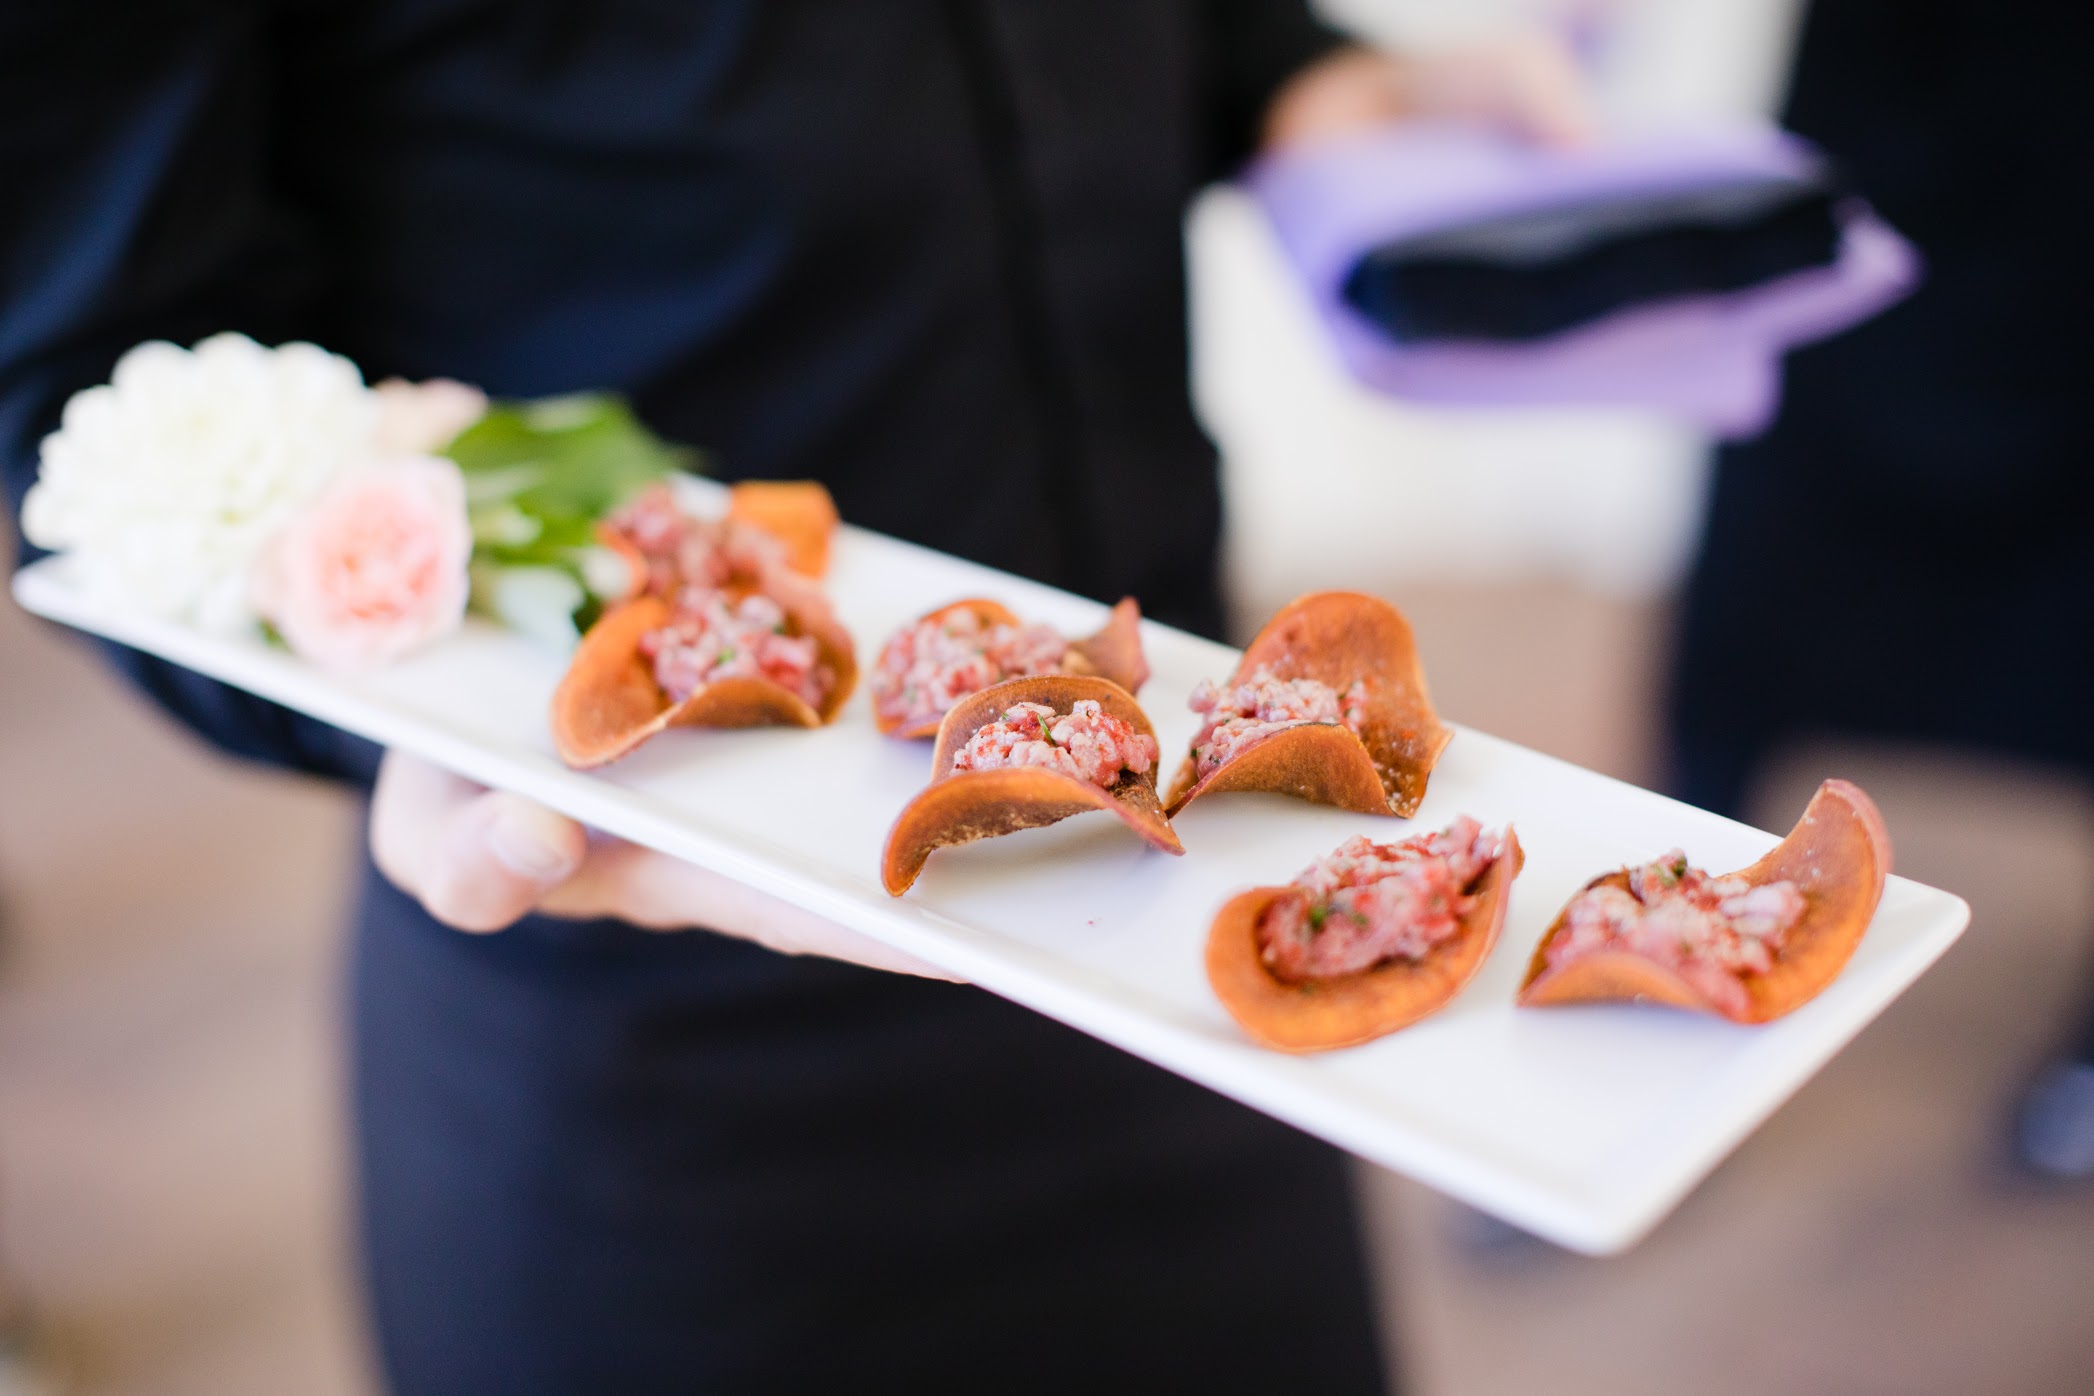 Catering Can Help You Save Time and Money